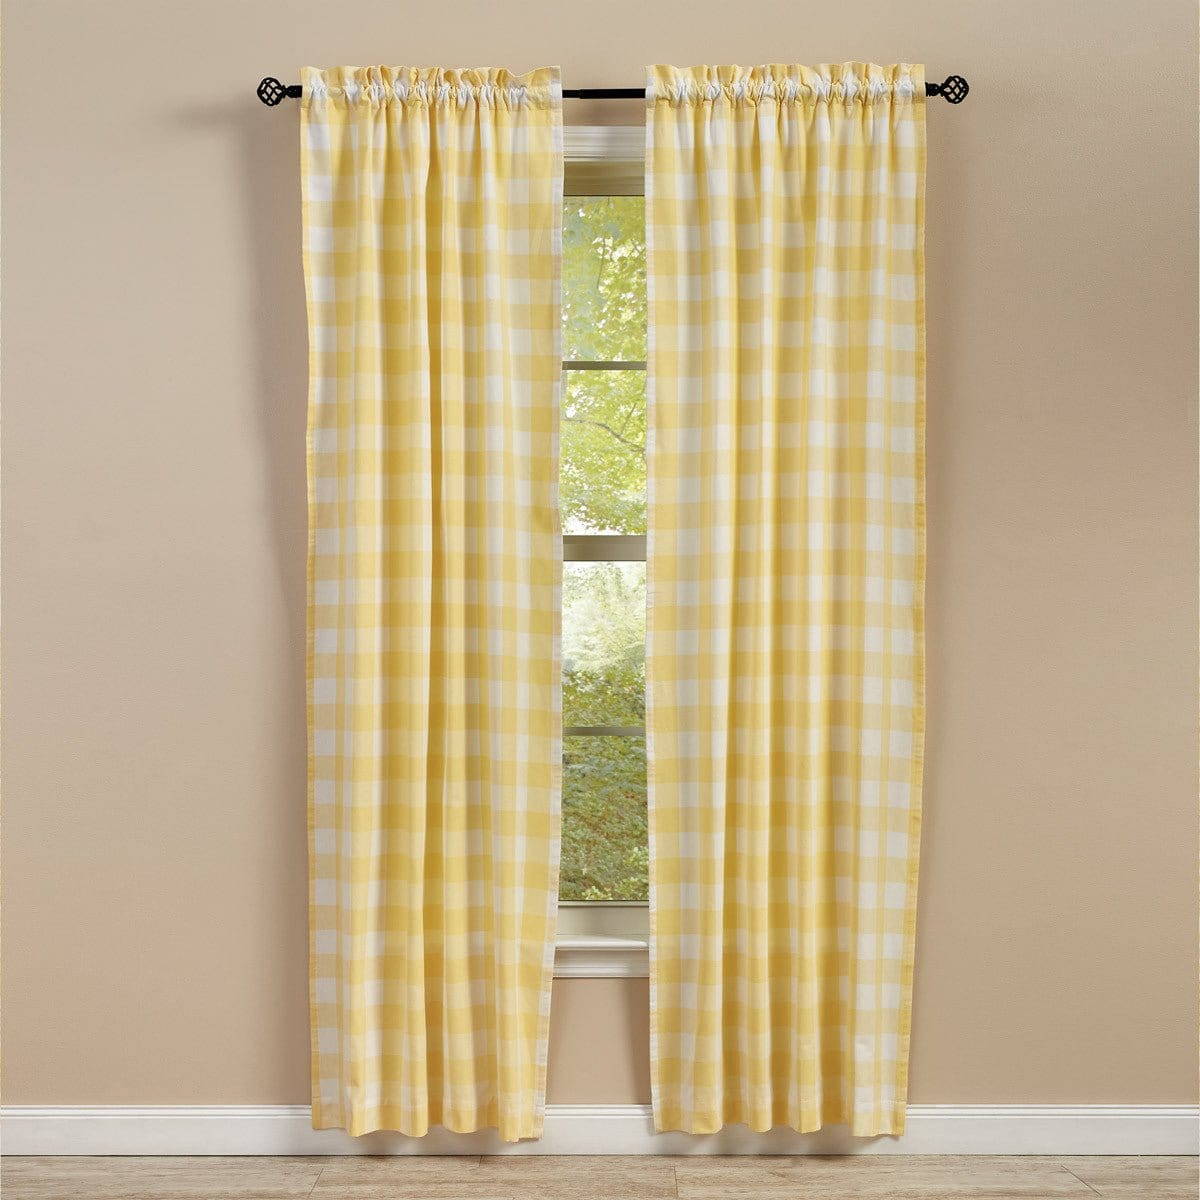 Wicklow Check in Yellow Panel Pair With Tie Backs 84" Long Lined-Park Designs-The Village Merchant